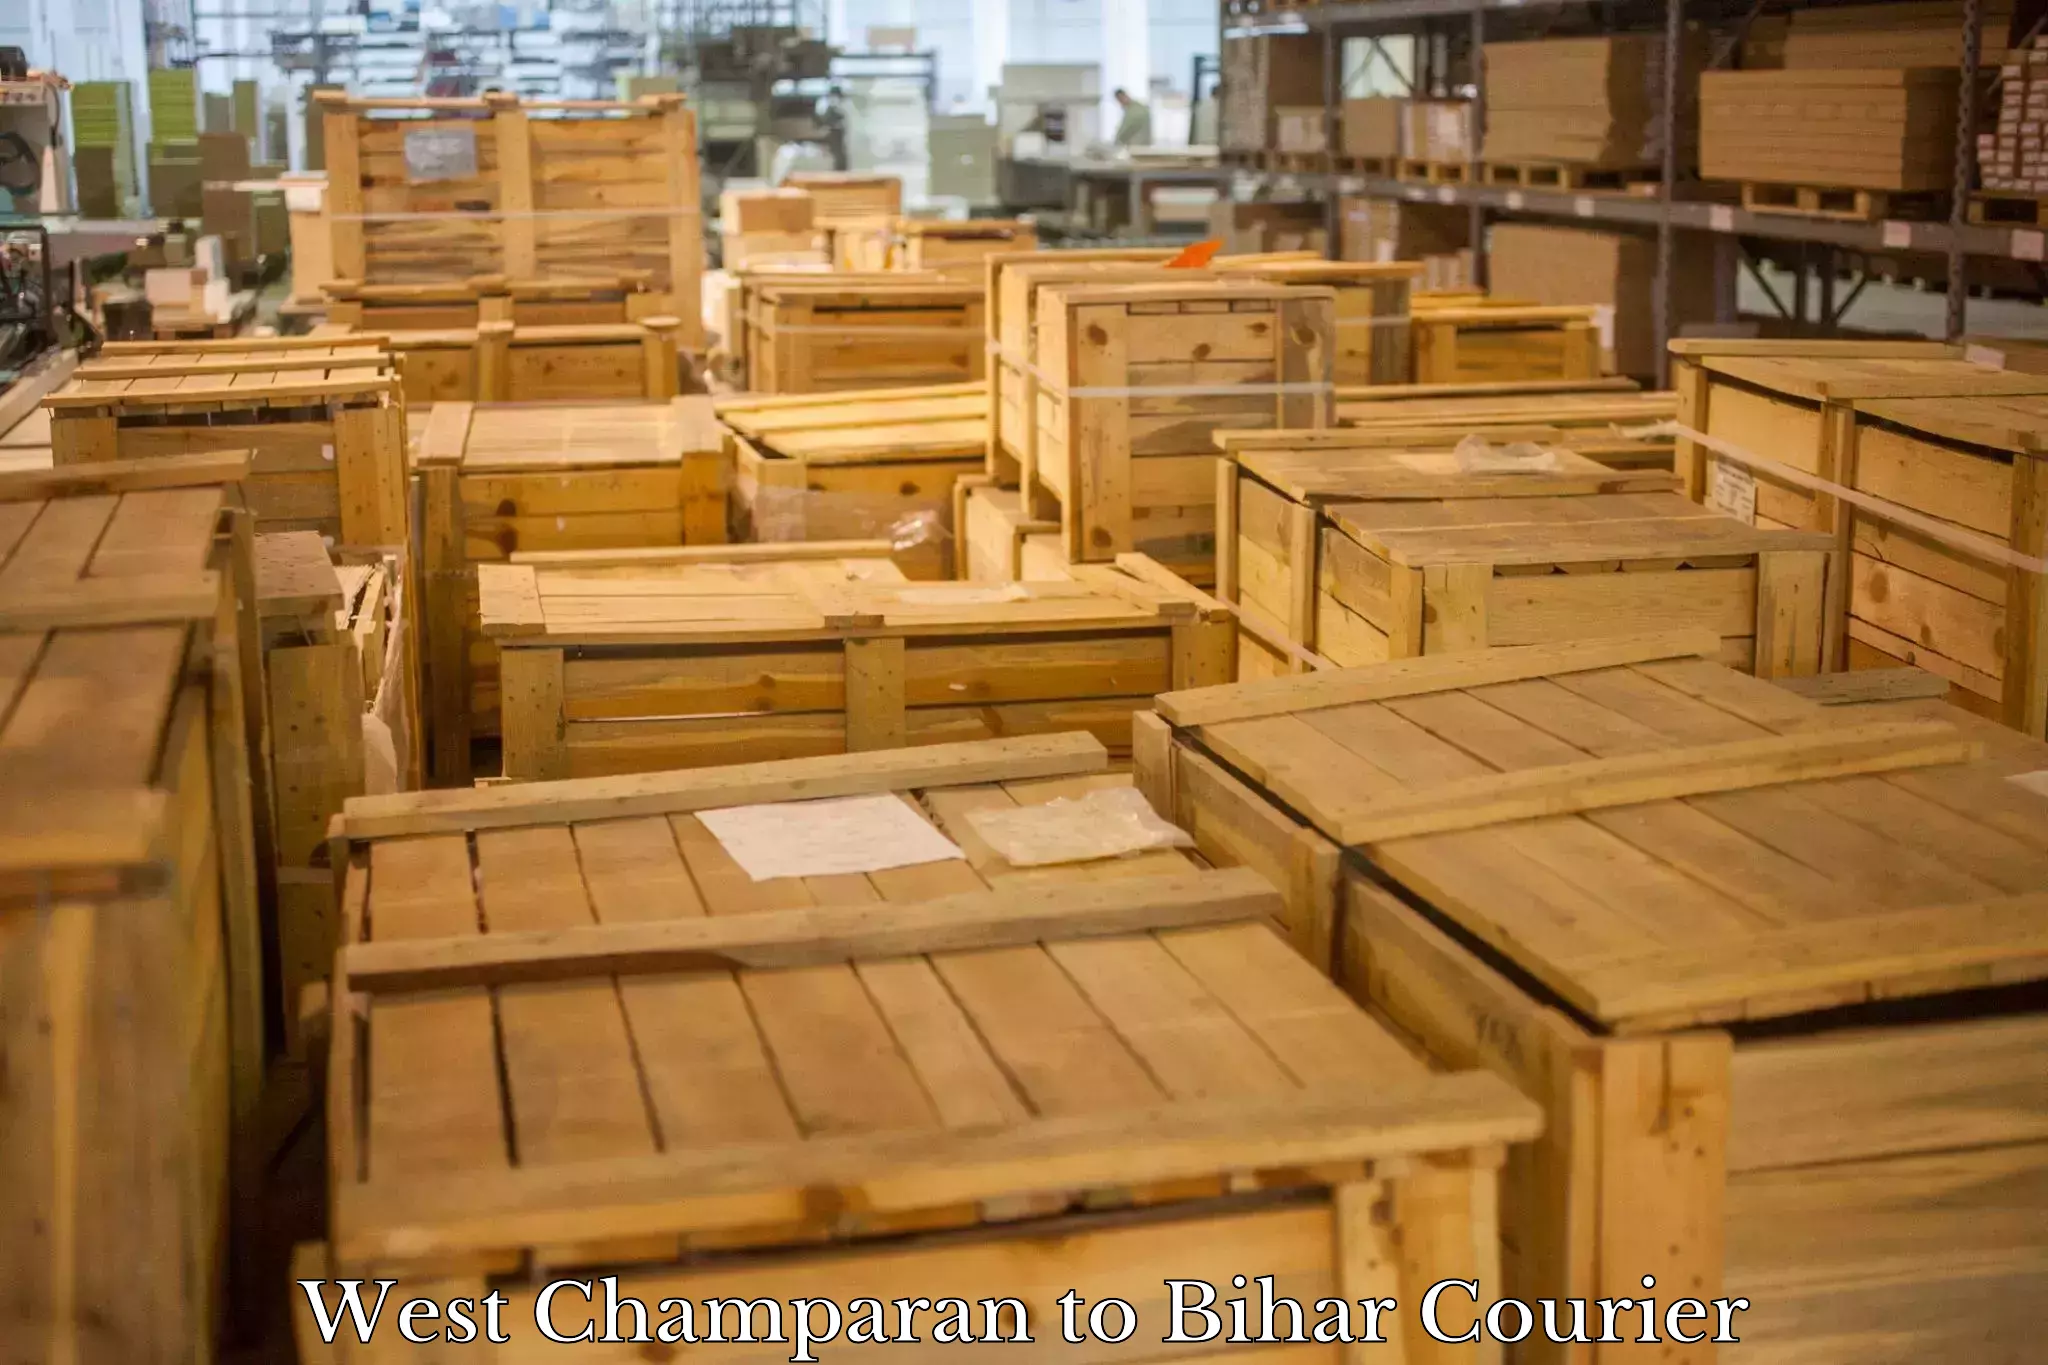 Efficient order fulfillment West Champaran to Purnia